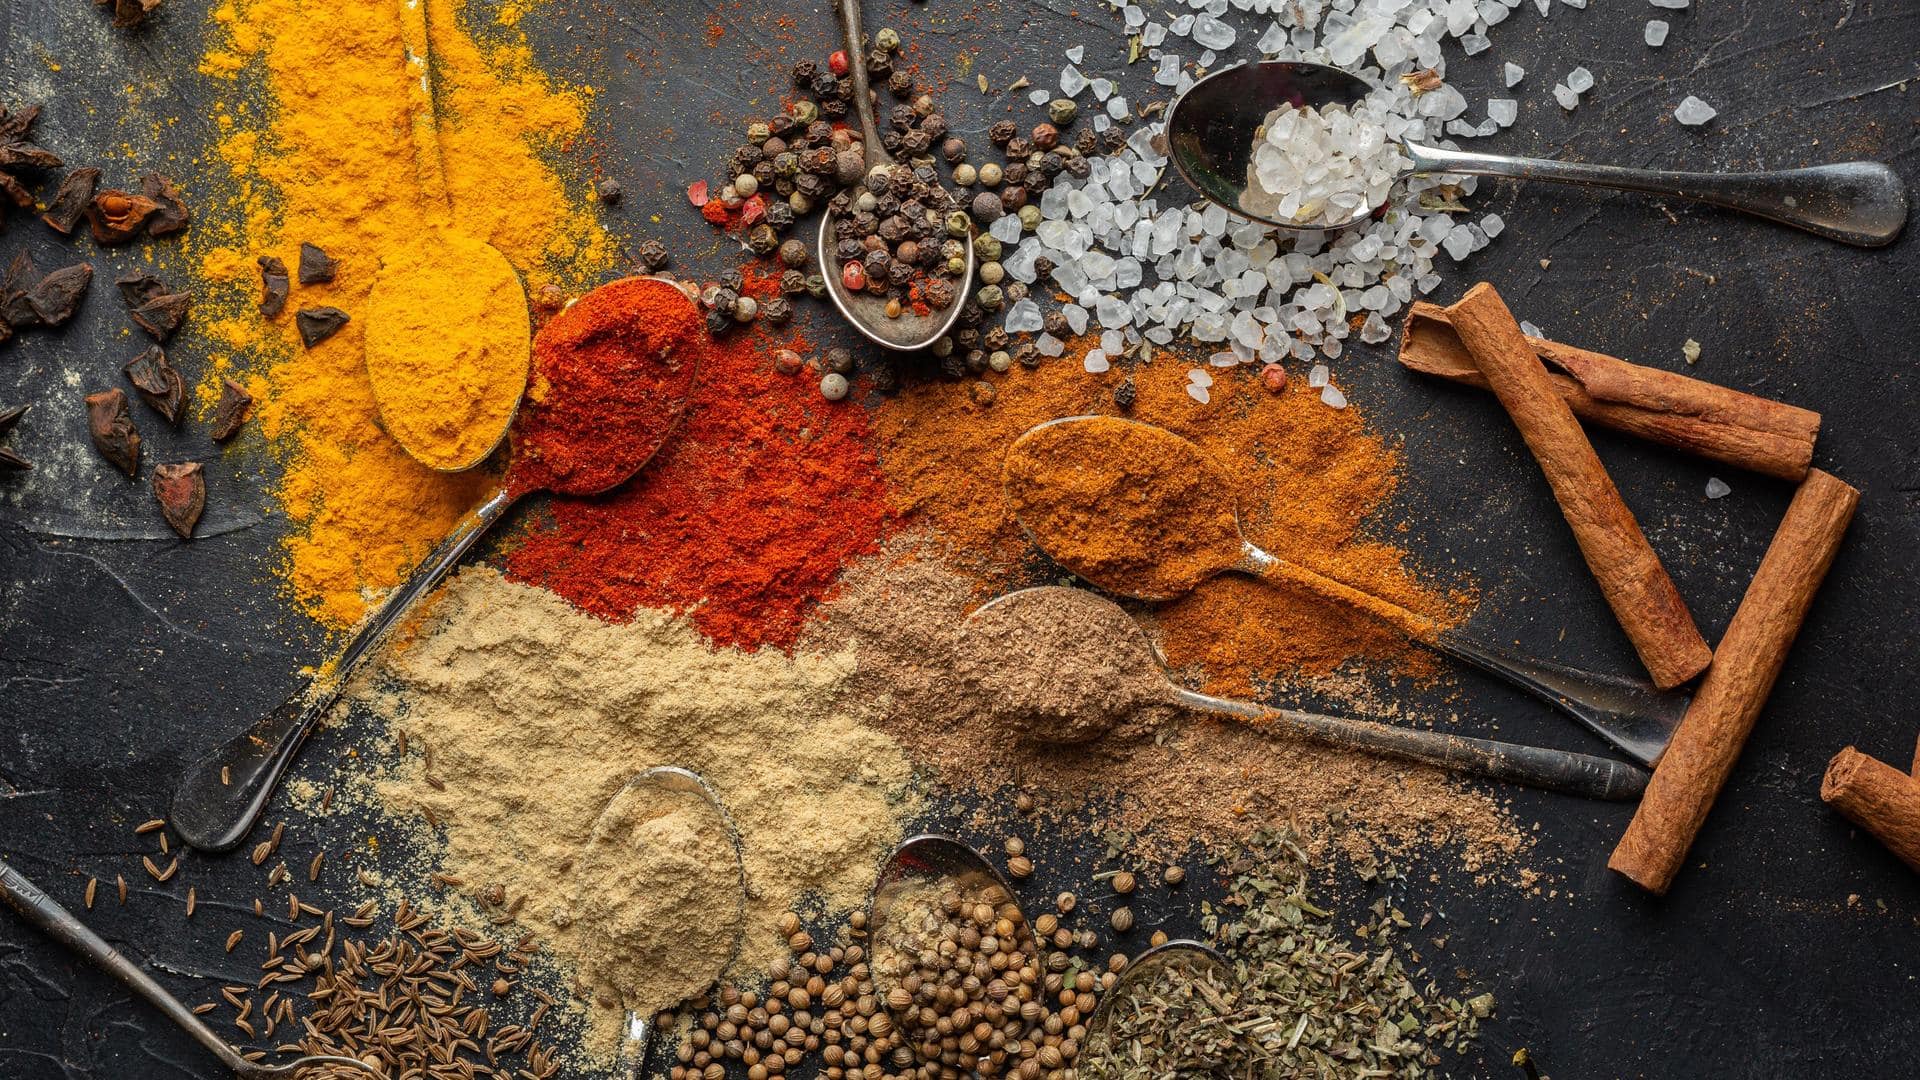 Transform your Indian dishes with these 5 must-have spice mixes